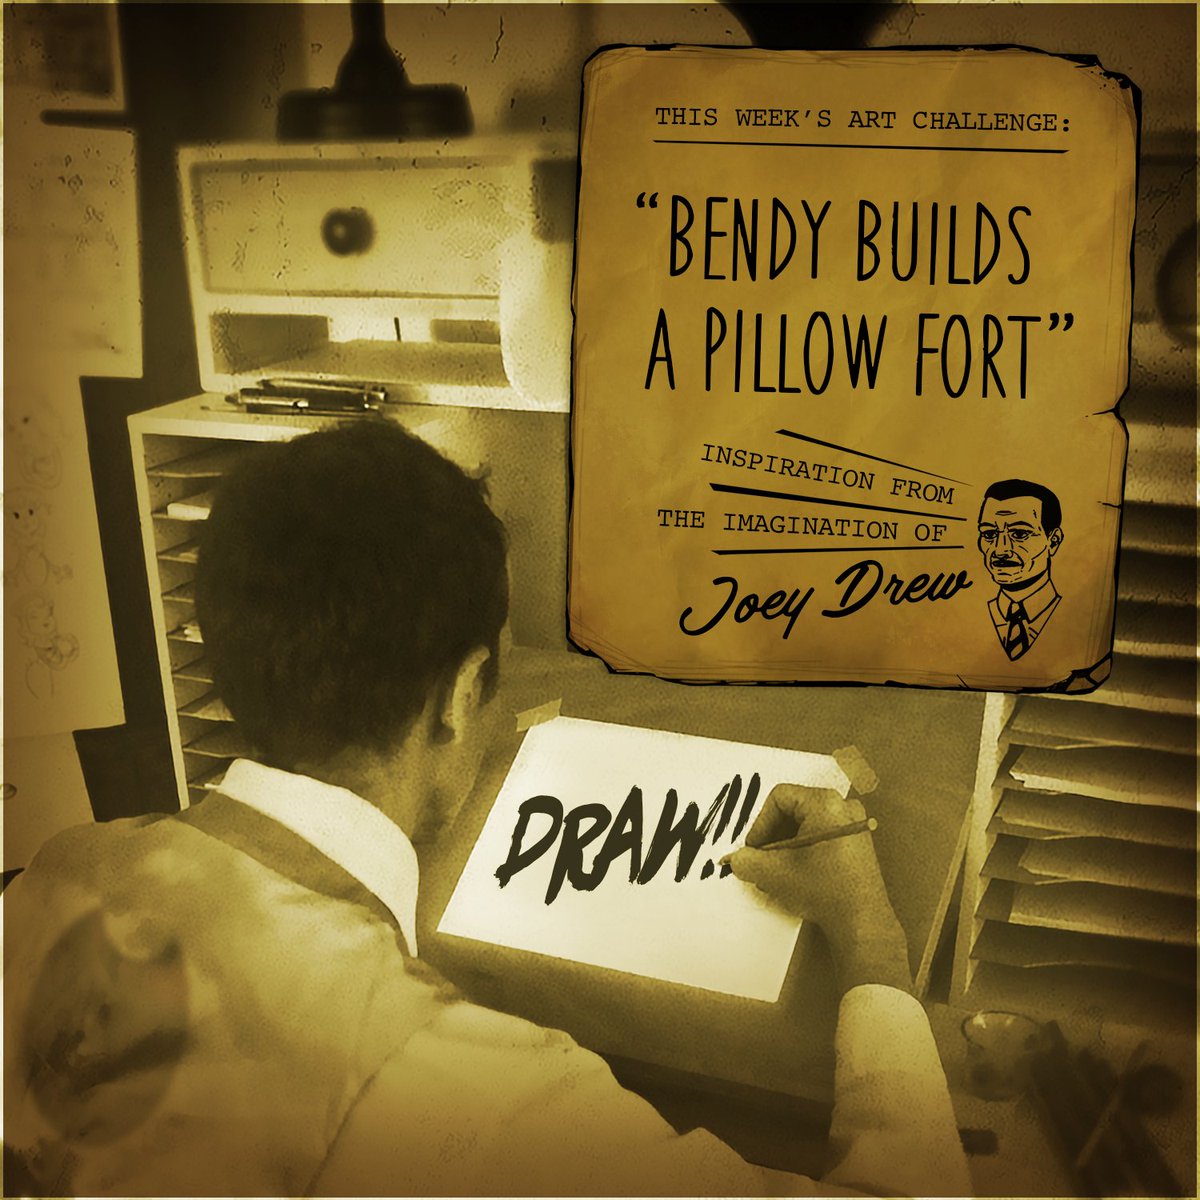 Bendy’s fort is ready for the pillow fight! Let’s see your artist’s interpretation! 🎨🖌️ This week’s art challenge has been placed on your desk. Go! #JoeysArtChallenge